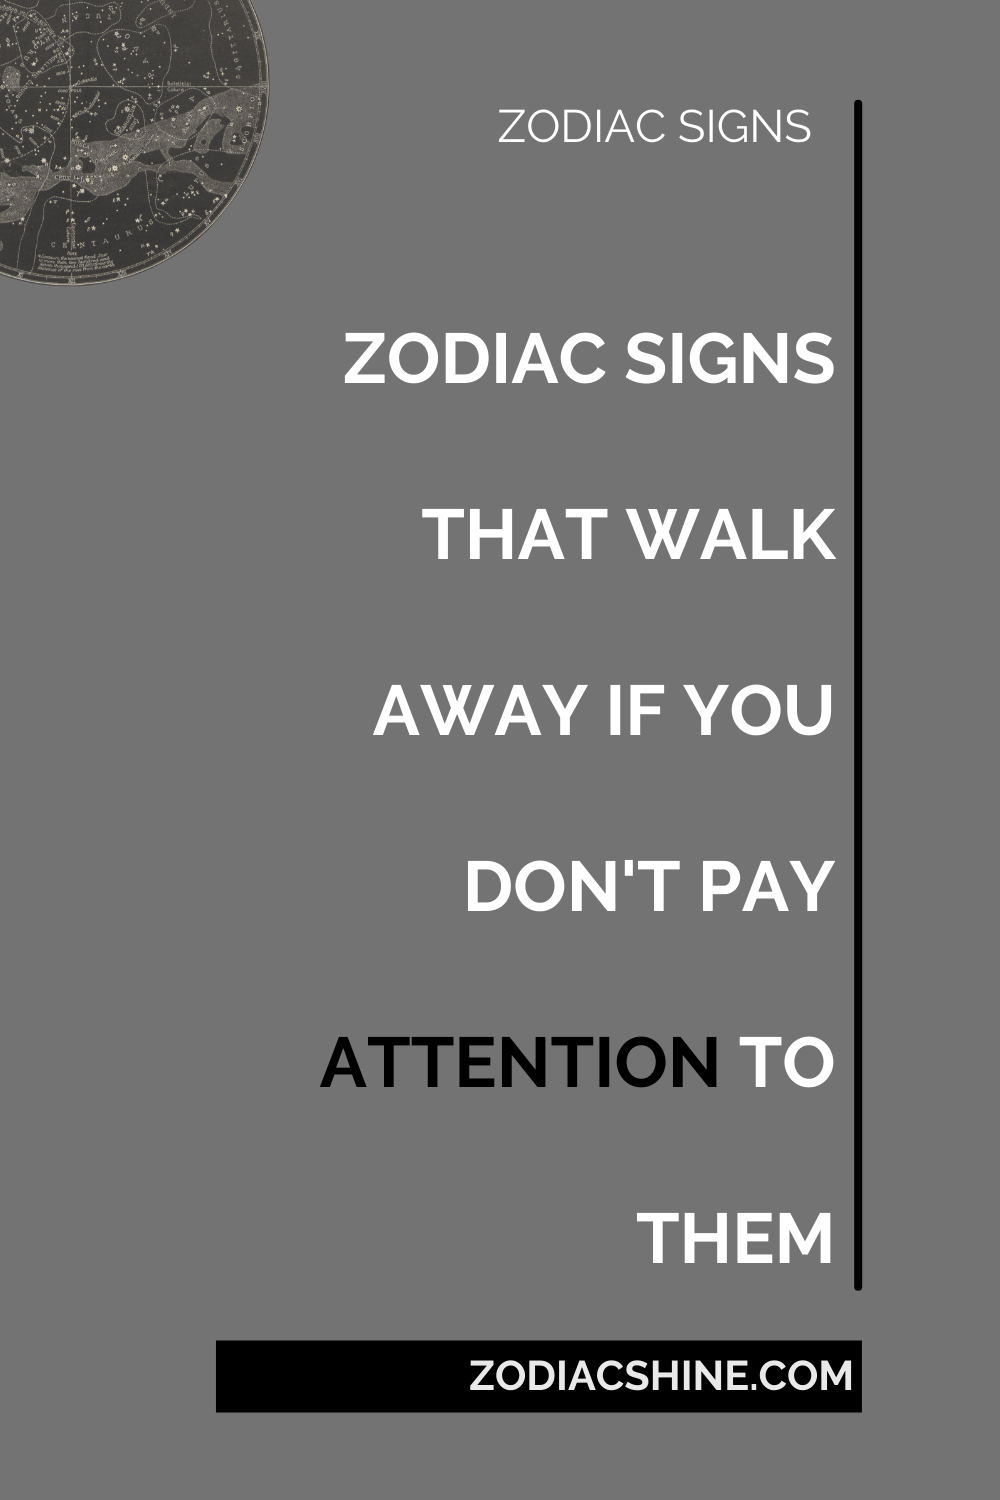 ZODIAC SIGNS THAT WALK AWAY IF YOU DON'T PAY ATTENTION TO THEM